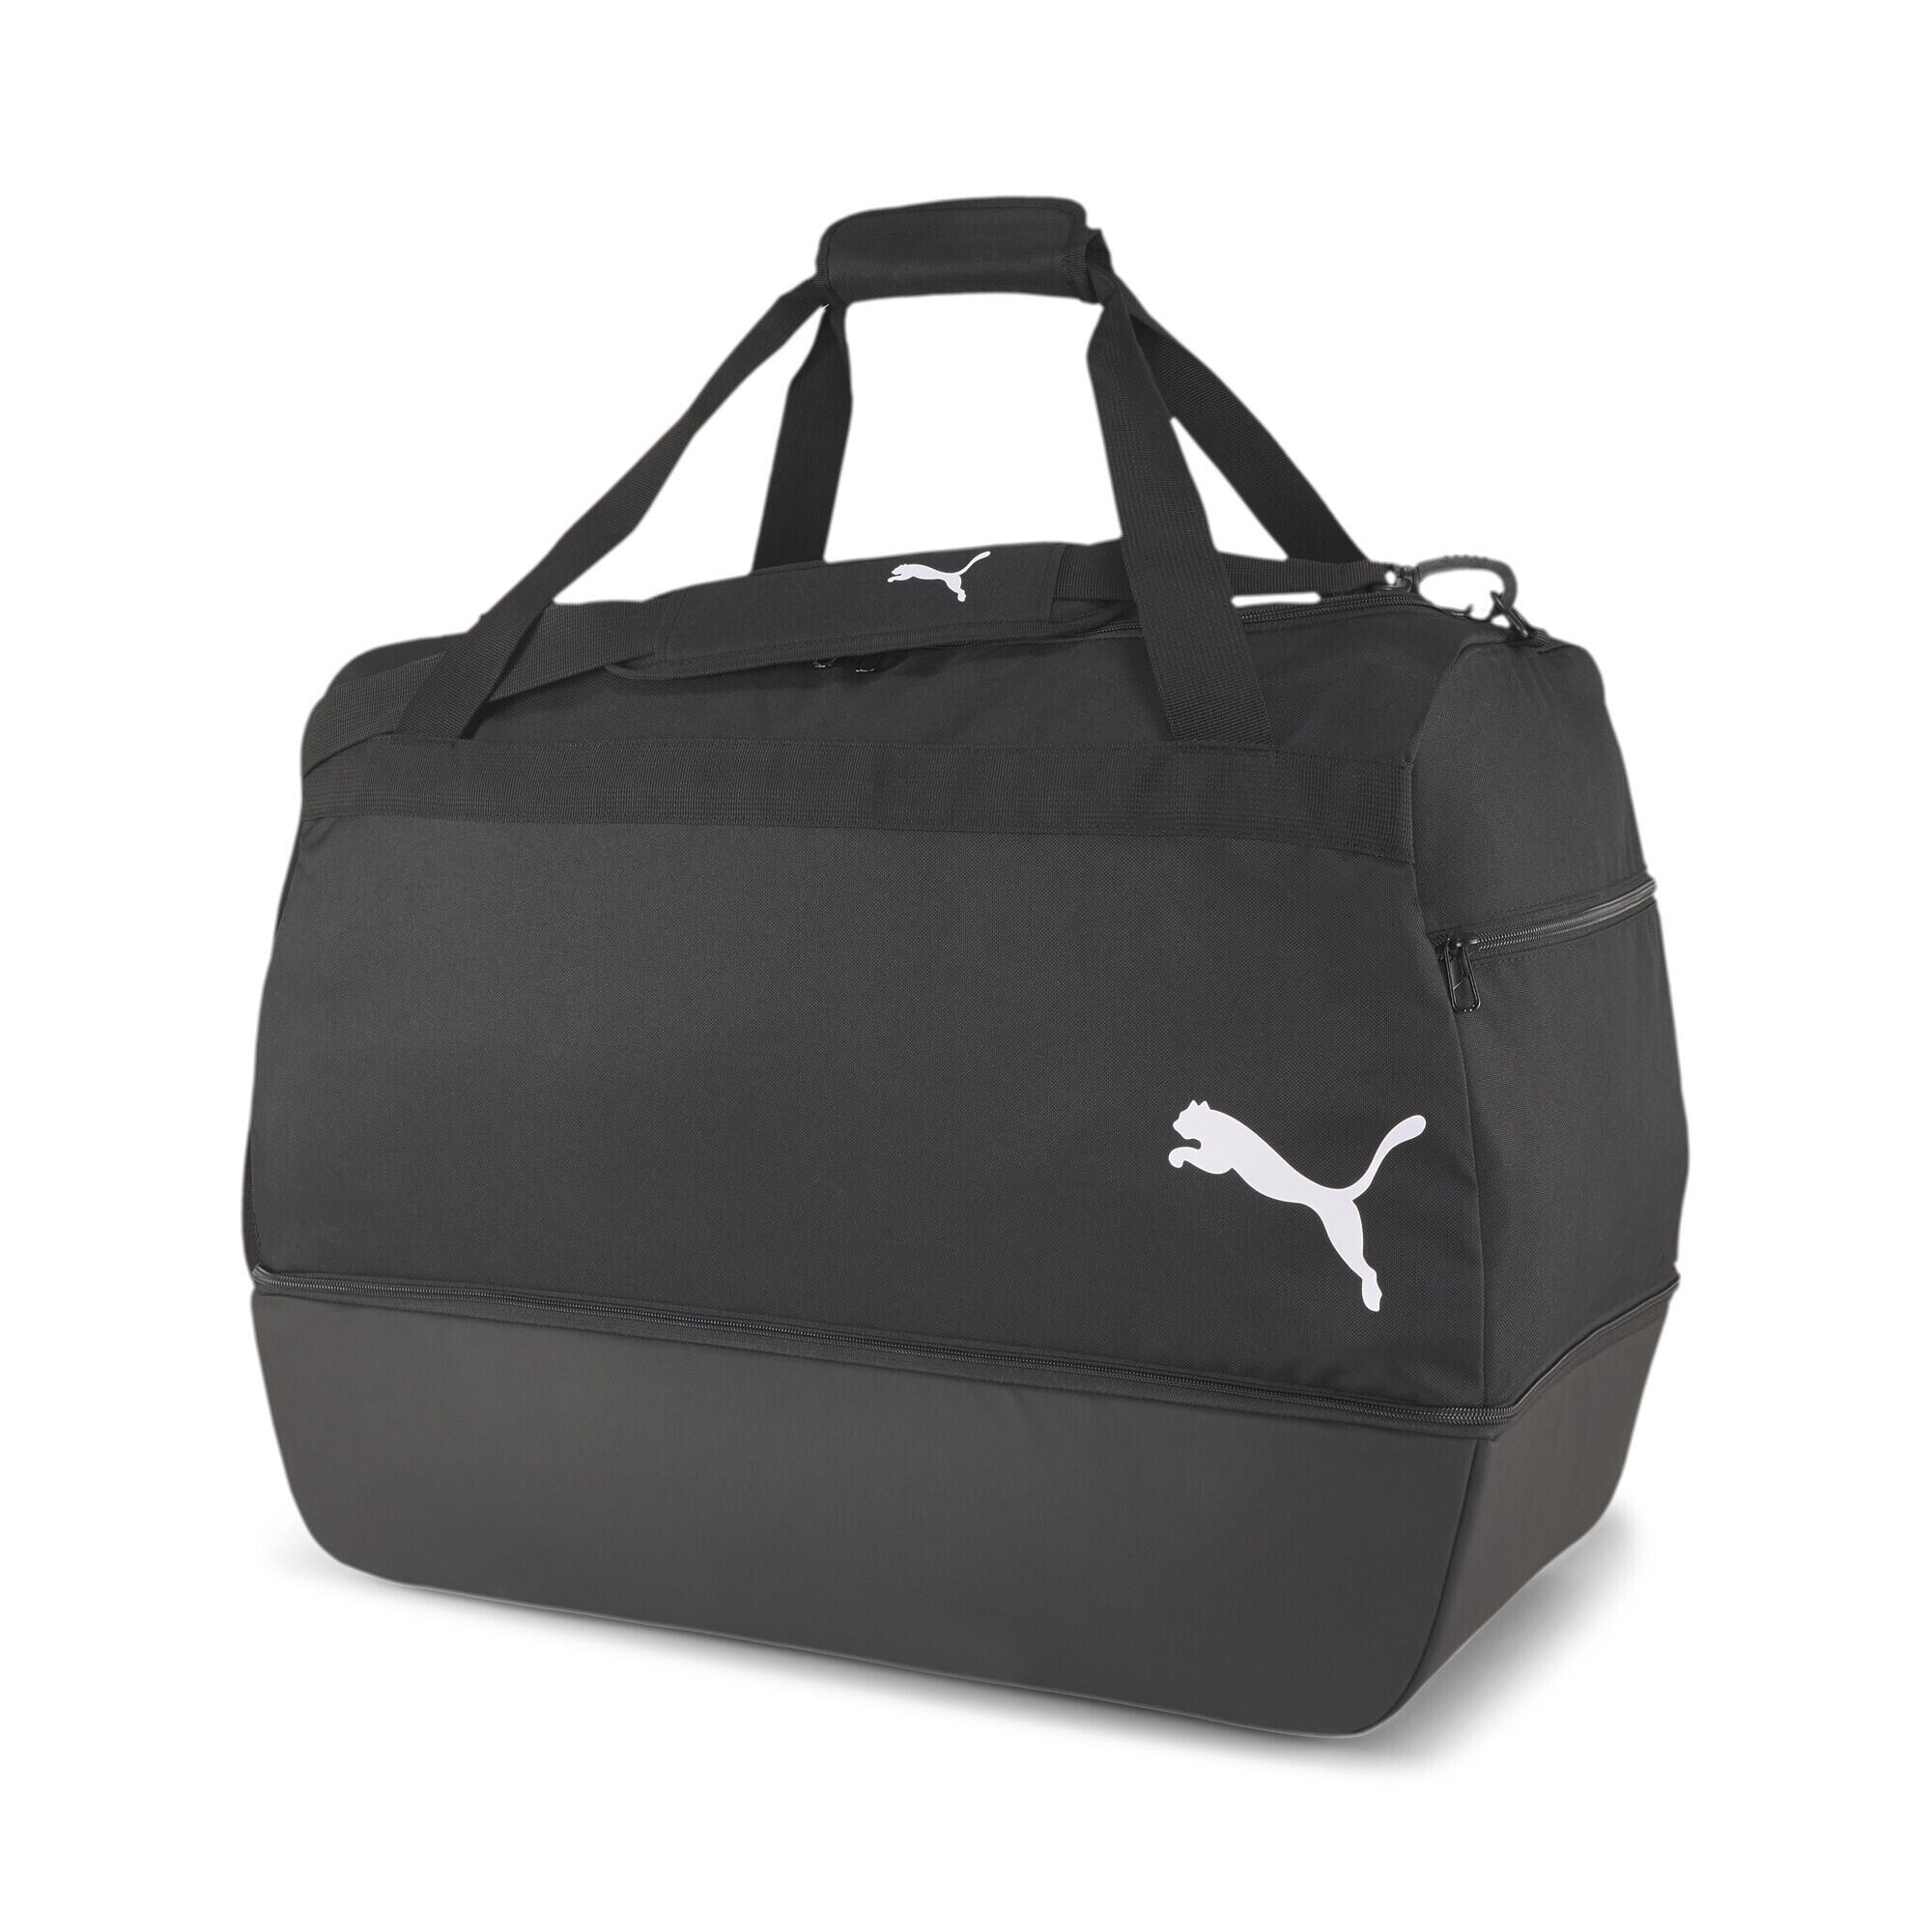 Puma Team Goal 23 Teambag with Boot Compartment, Black 1/4